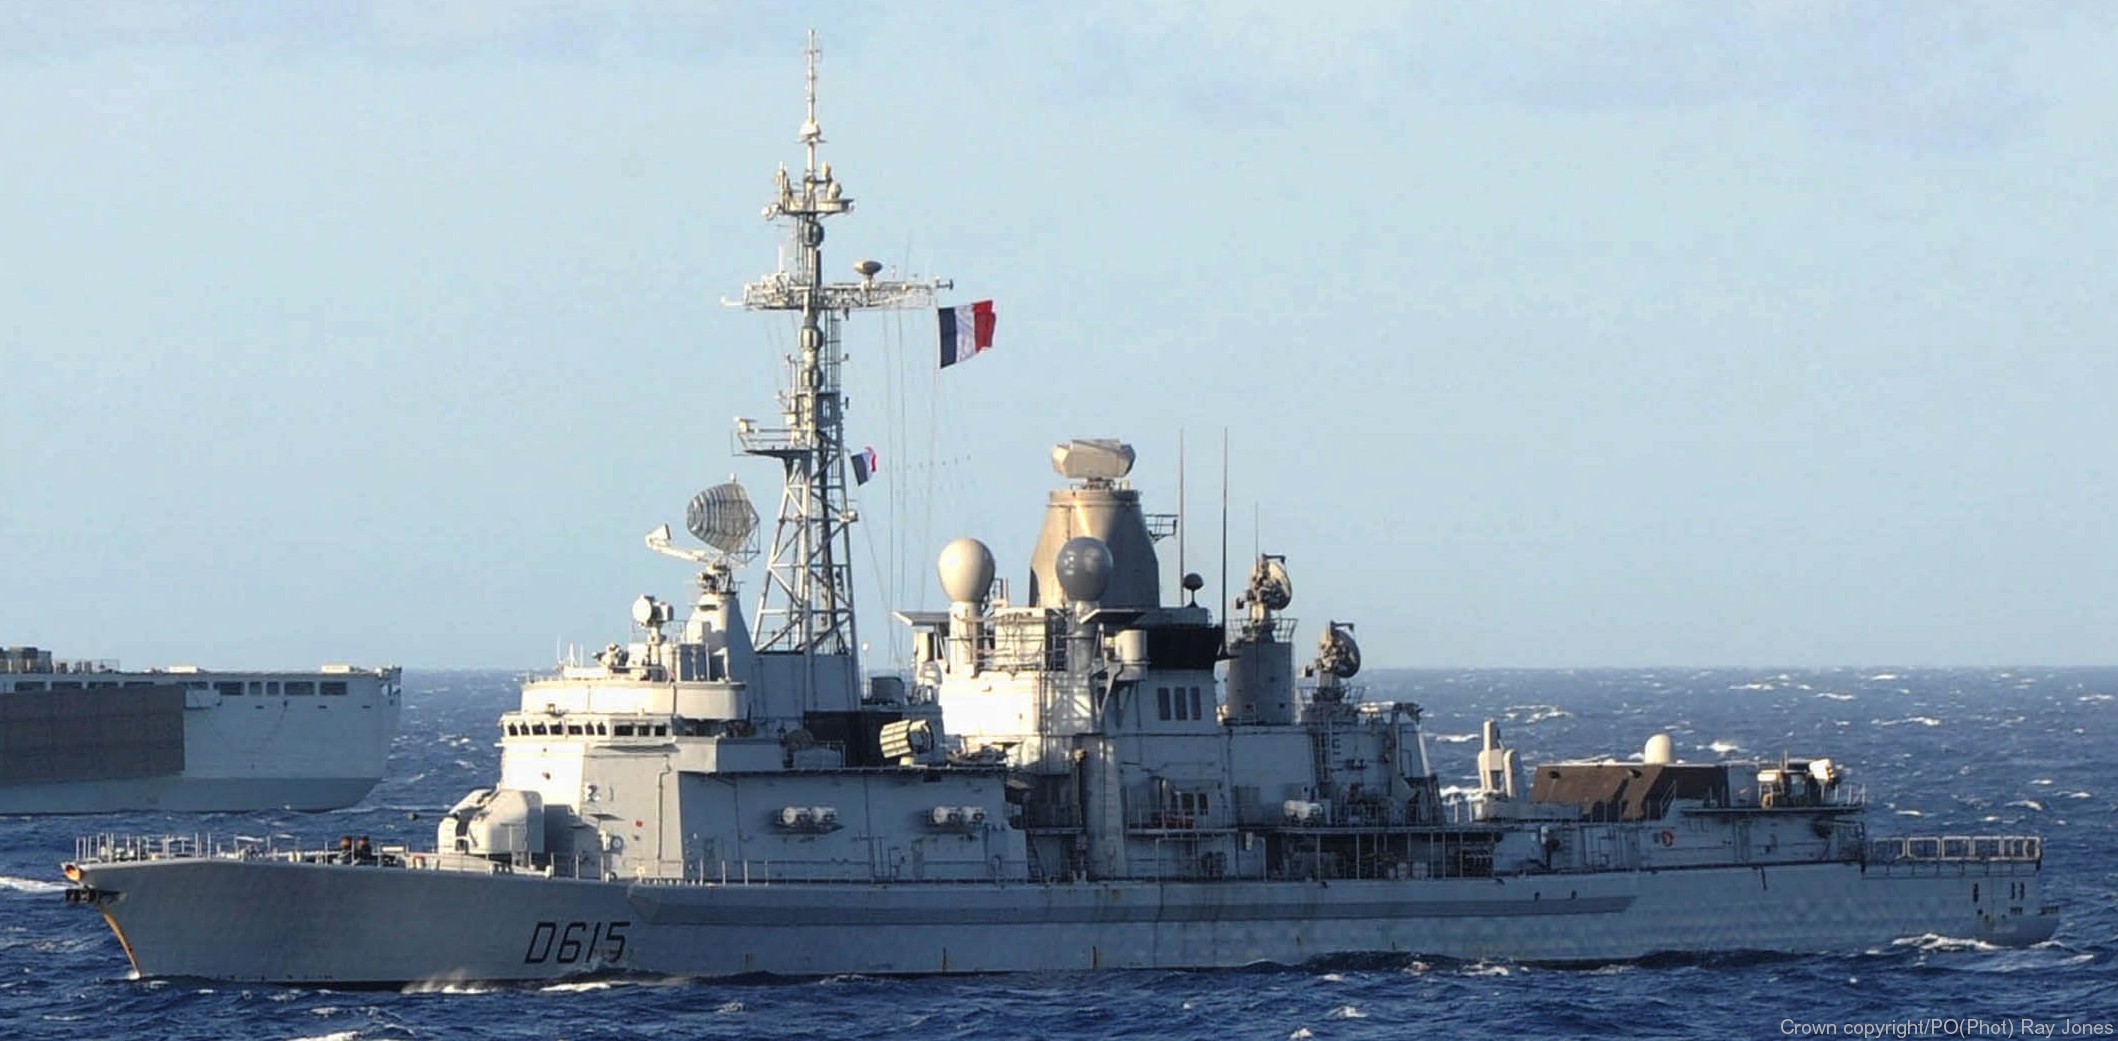 d-615 fs jean bart cassard f70aa class guided missile frigate ffgh ddg french navy marine nationale 14